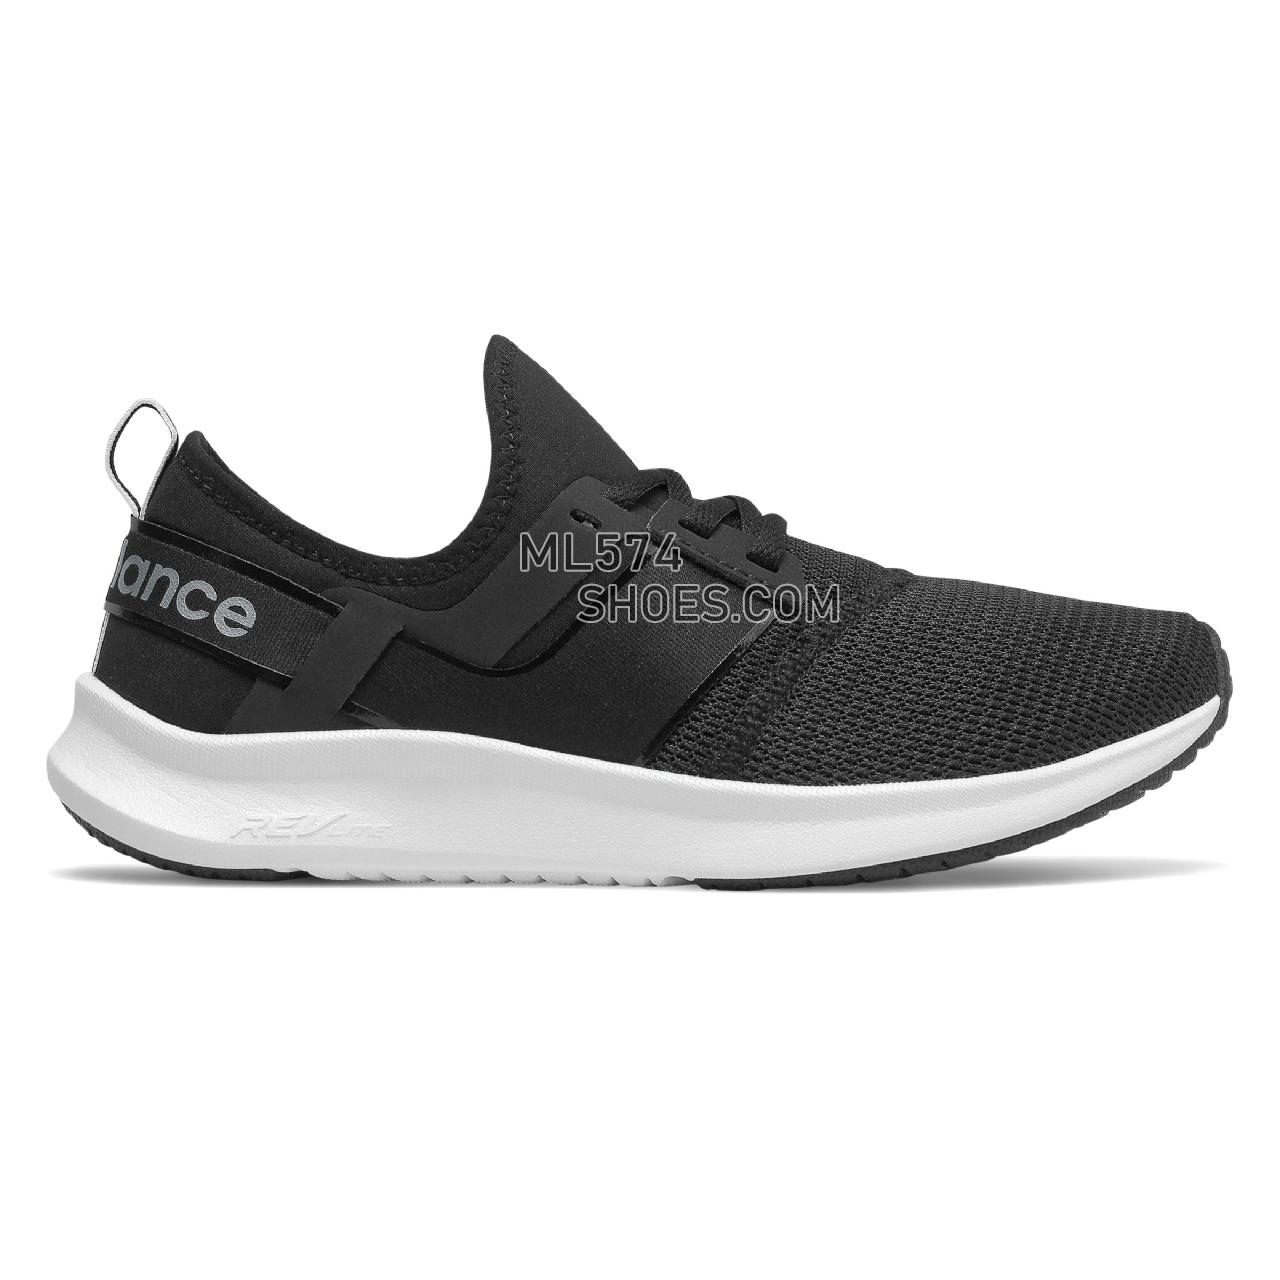 New Balance NB Nergize Sport - Women's Sport Style Sneakers - Black with White Metallic - WNRGSSB1